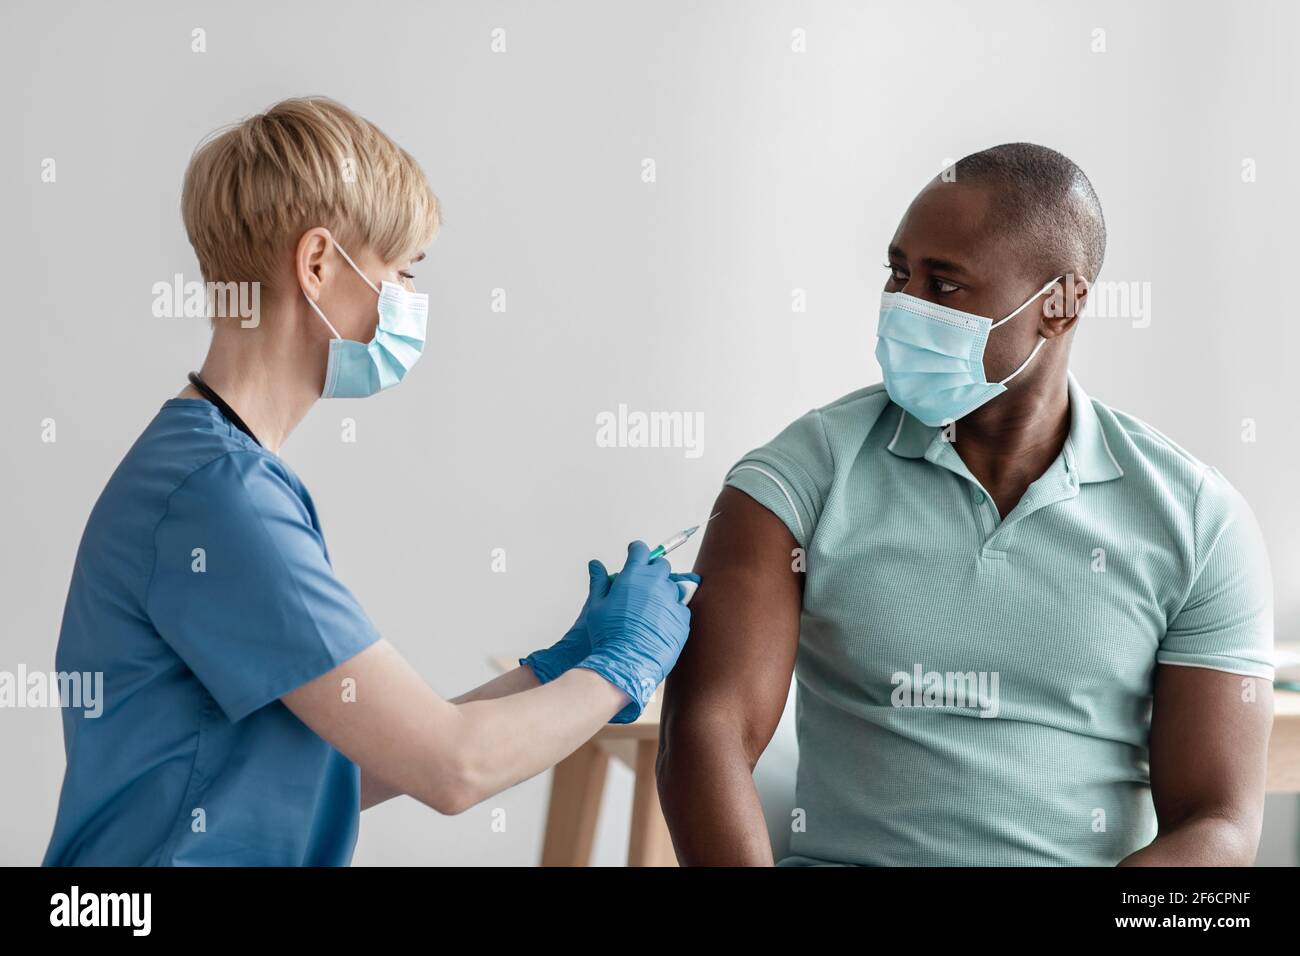 Vaccination, immunization, disease prevention, man in medical mask getting Covid-19 or flu vaccine Stock Photo